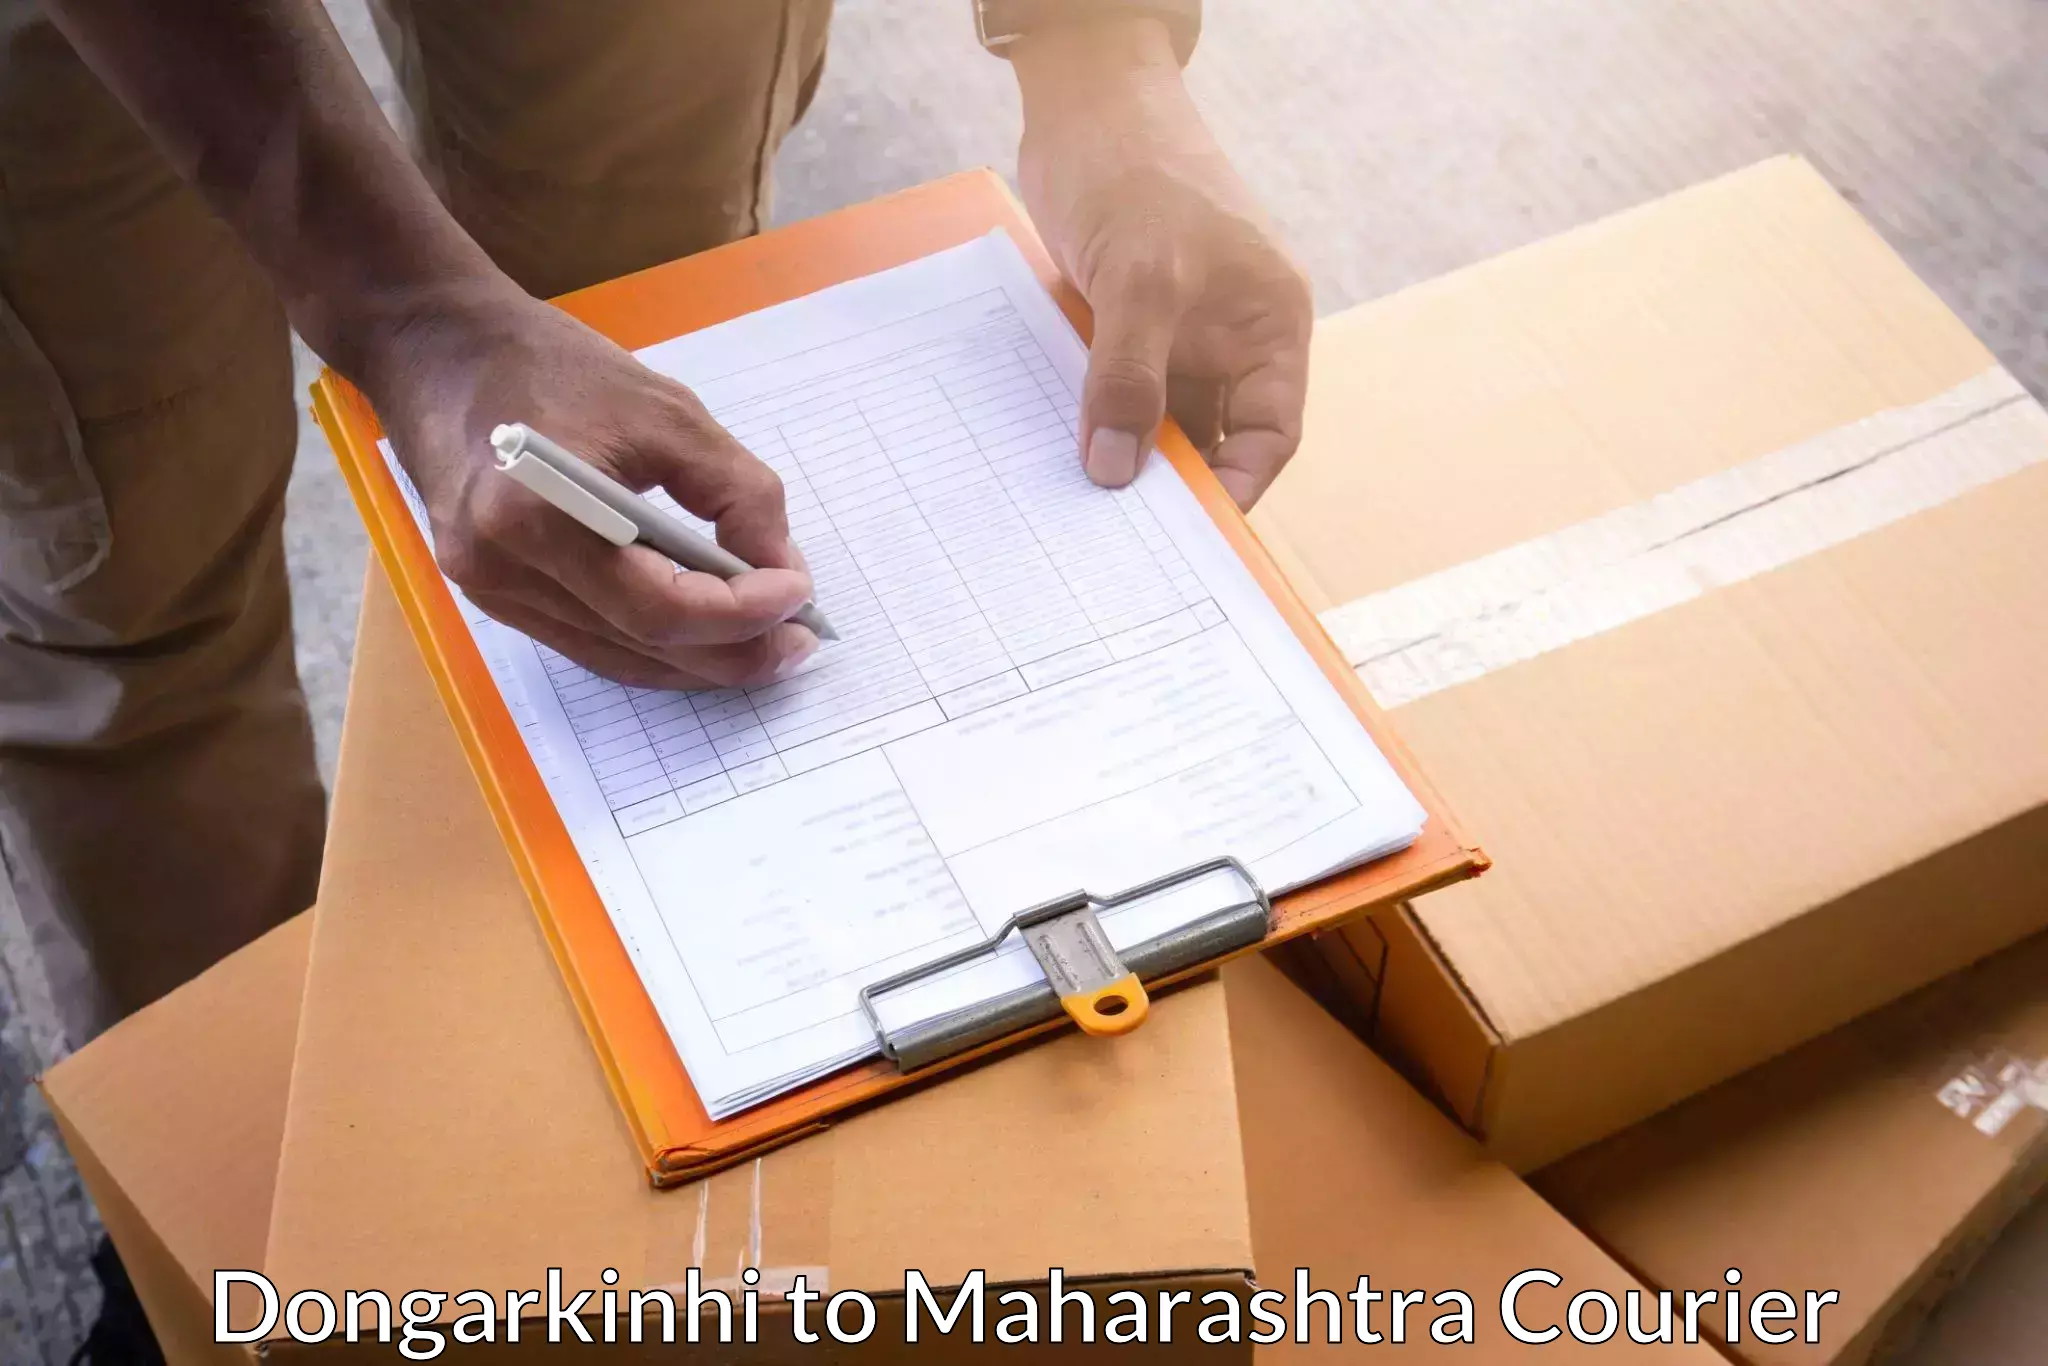 Courier service efficiency Dongarkinhi to Andheri